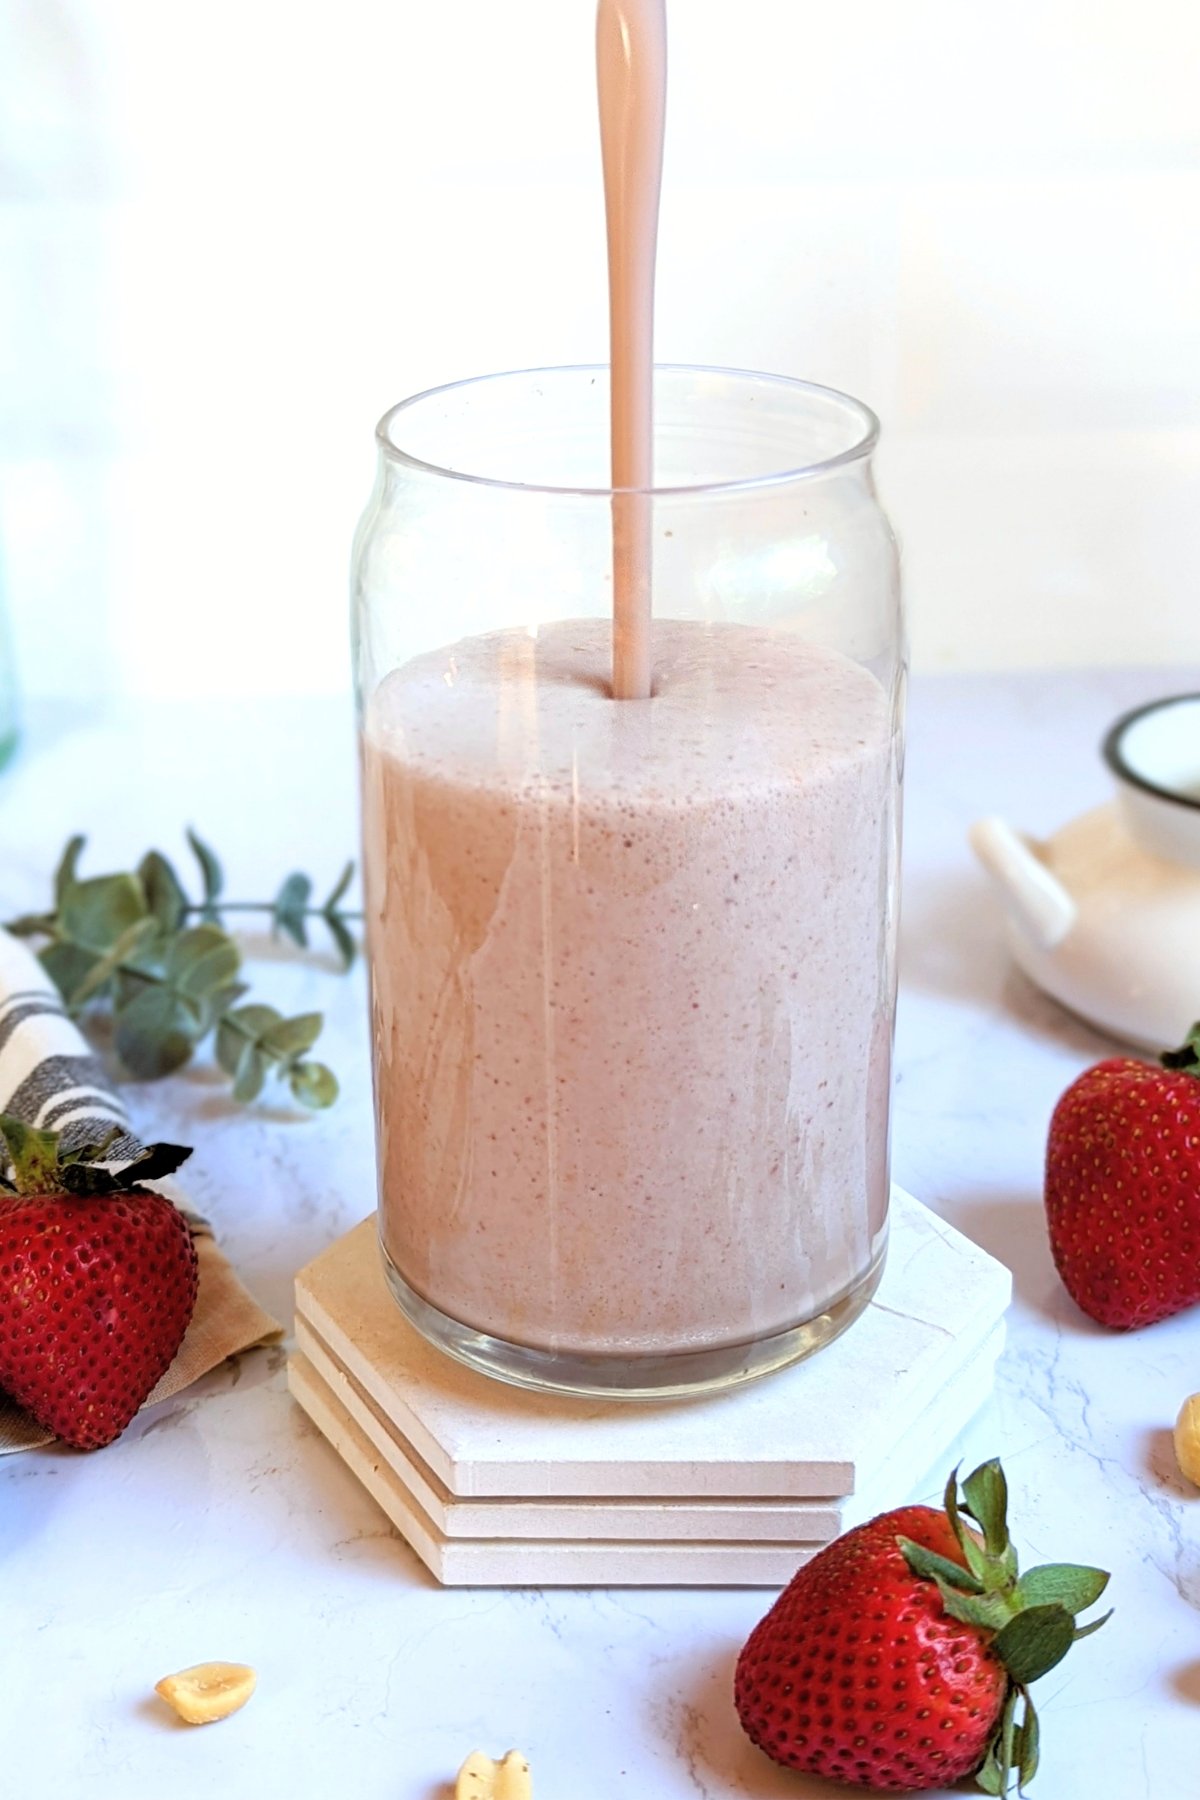 strawberry nut smoothie with peanut butter recipes with berries healthy smoothies high in protein and fruit anti-oxidant smoothies